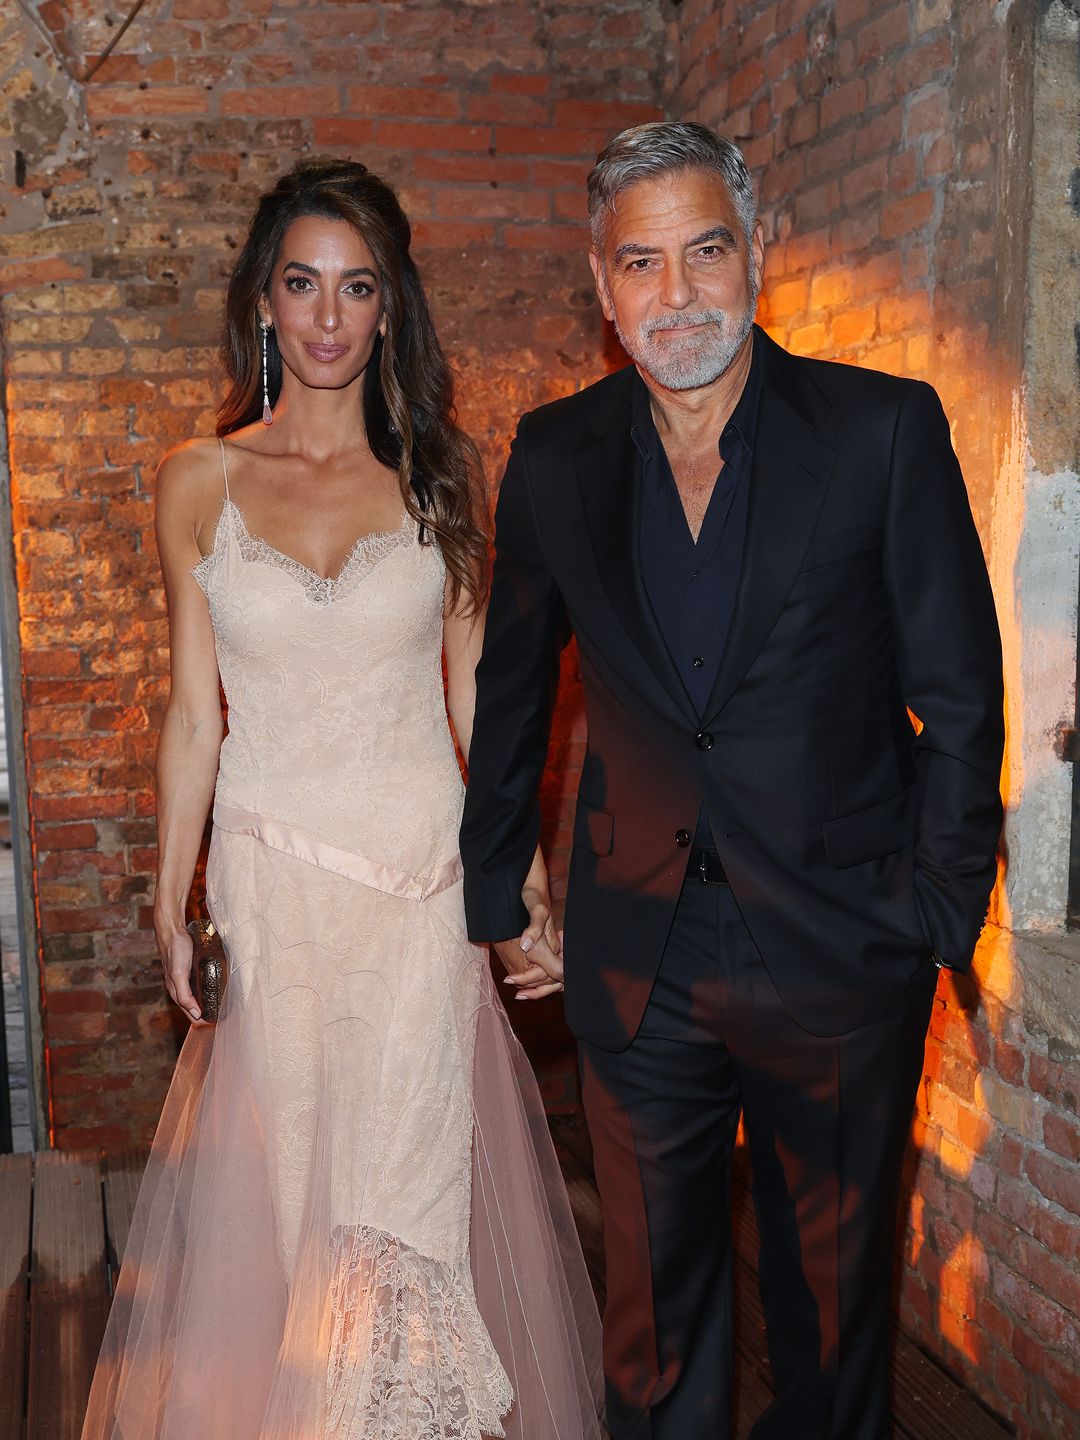 Amal Clooney and George Clooney attend the DVF Awards 2023 